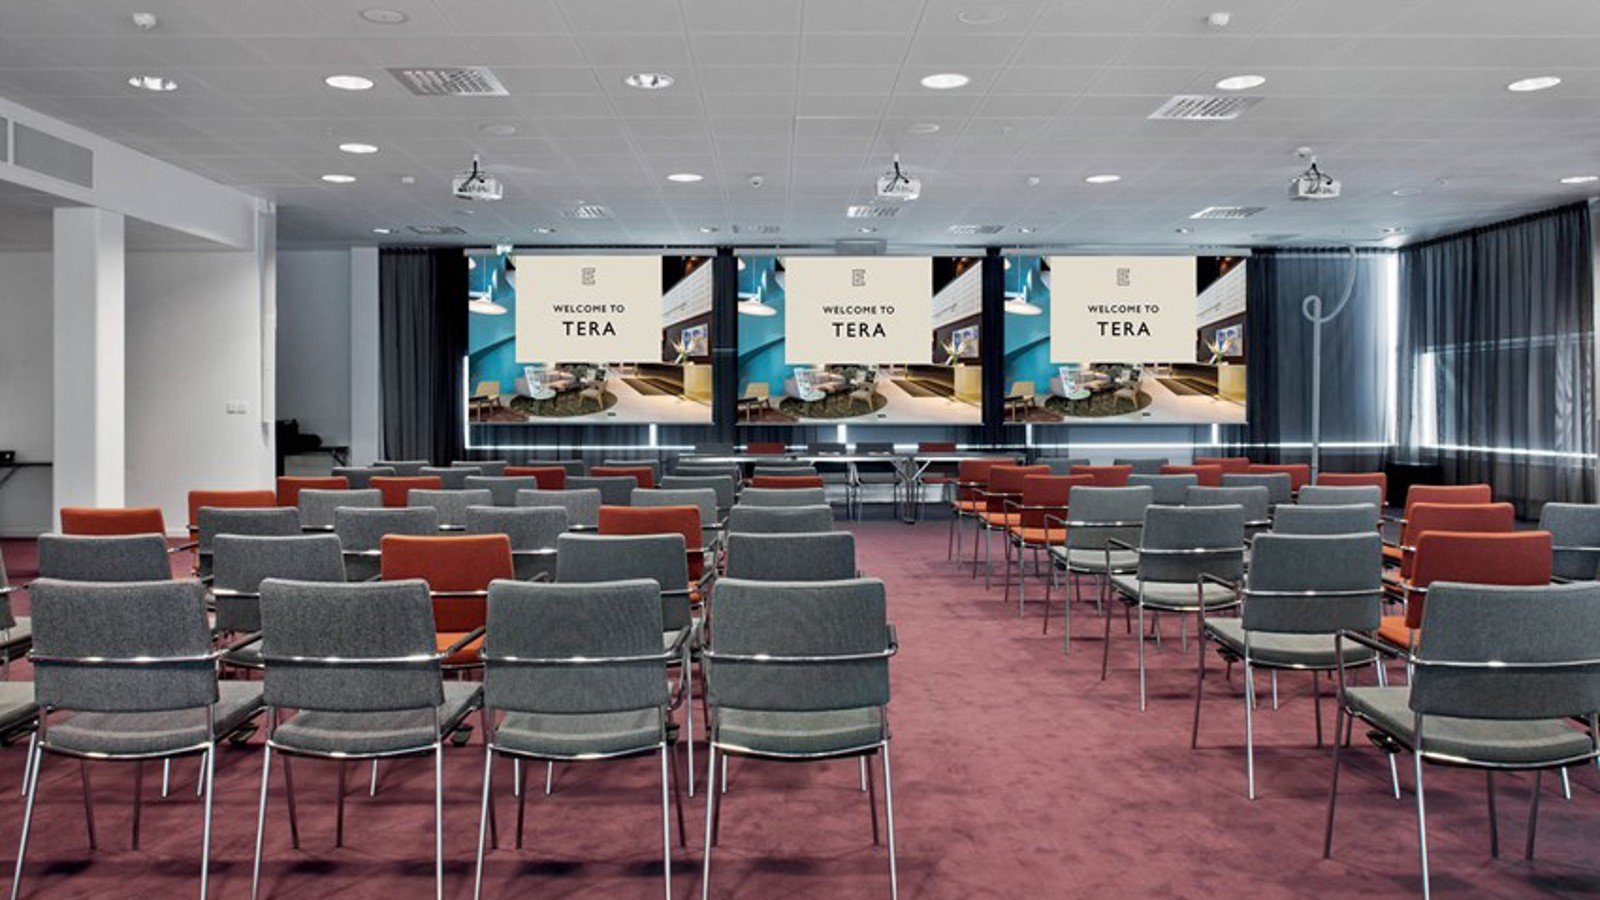 Large conference room with cinema seating and red carpet